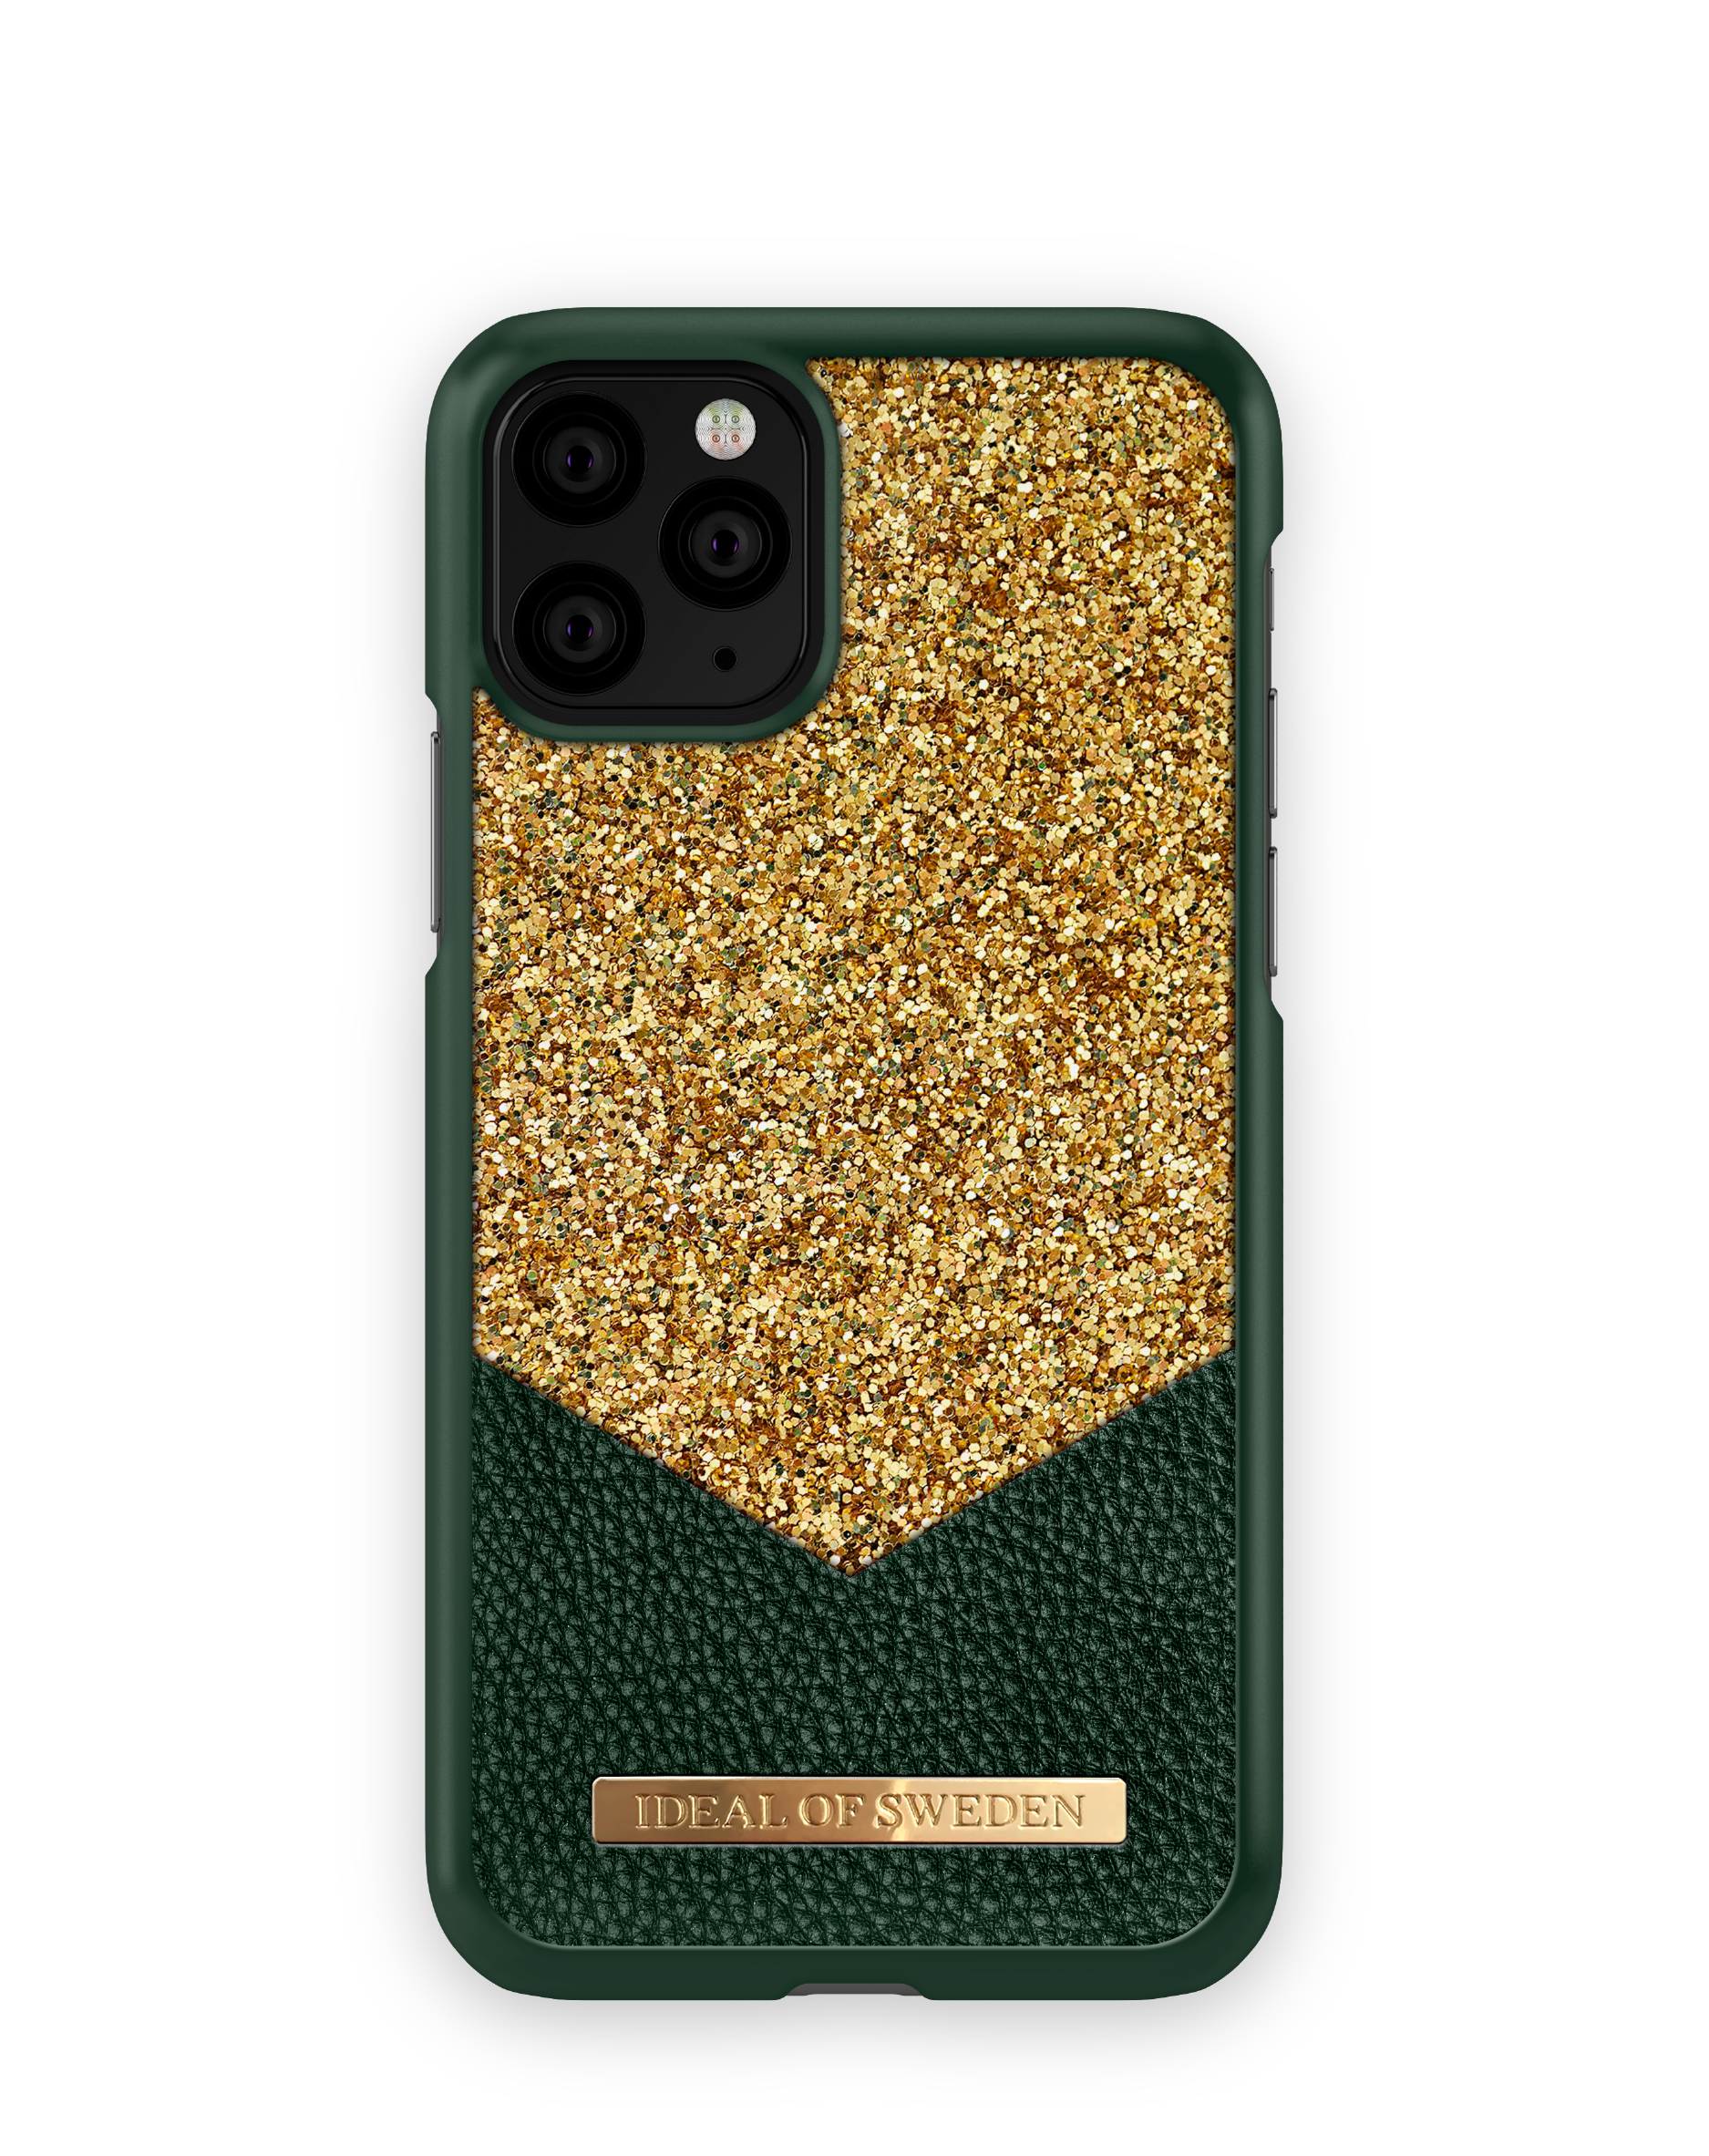 Pro, iPhone IDFCGC-I1958-176, SWEDEN iPhone Emerald X, Apple Apple Backcover, Apple, Apple iPhone 11 XS, IDEAL OF